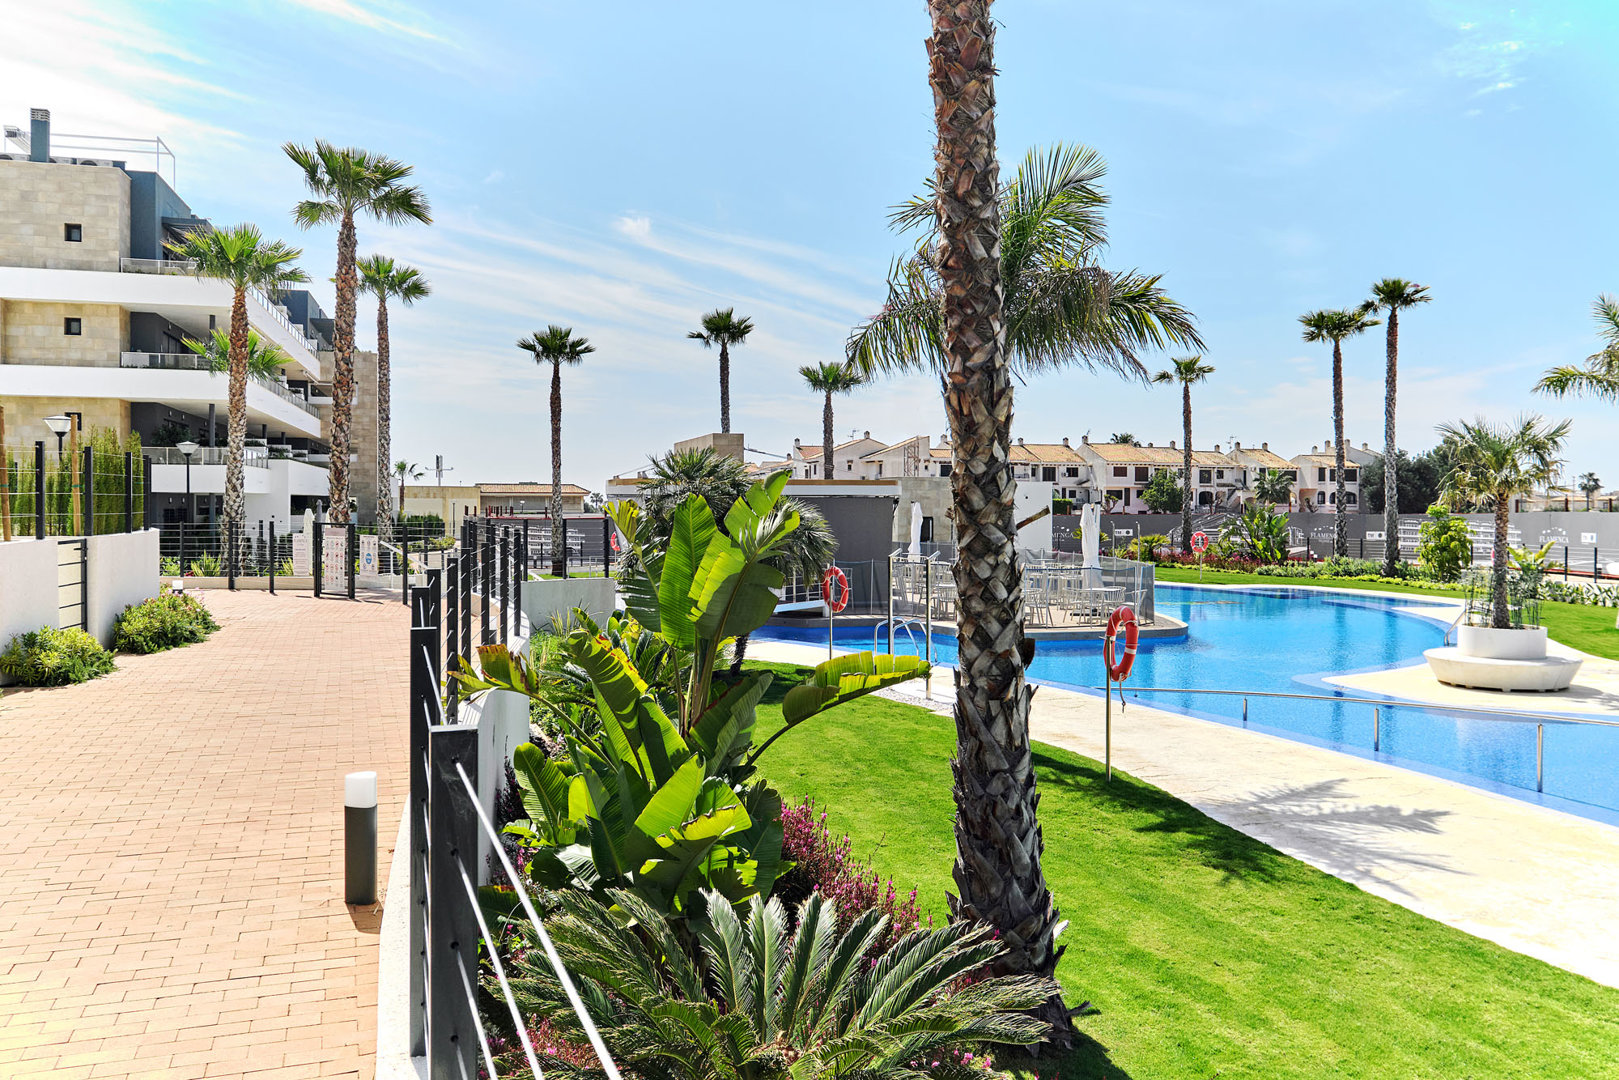 APARTMENT PERLA - in a 5 star holiday complex 